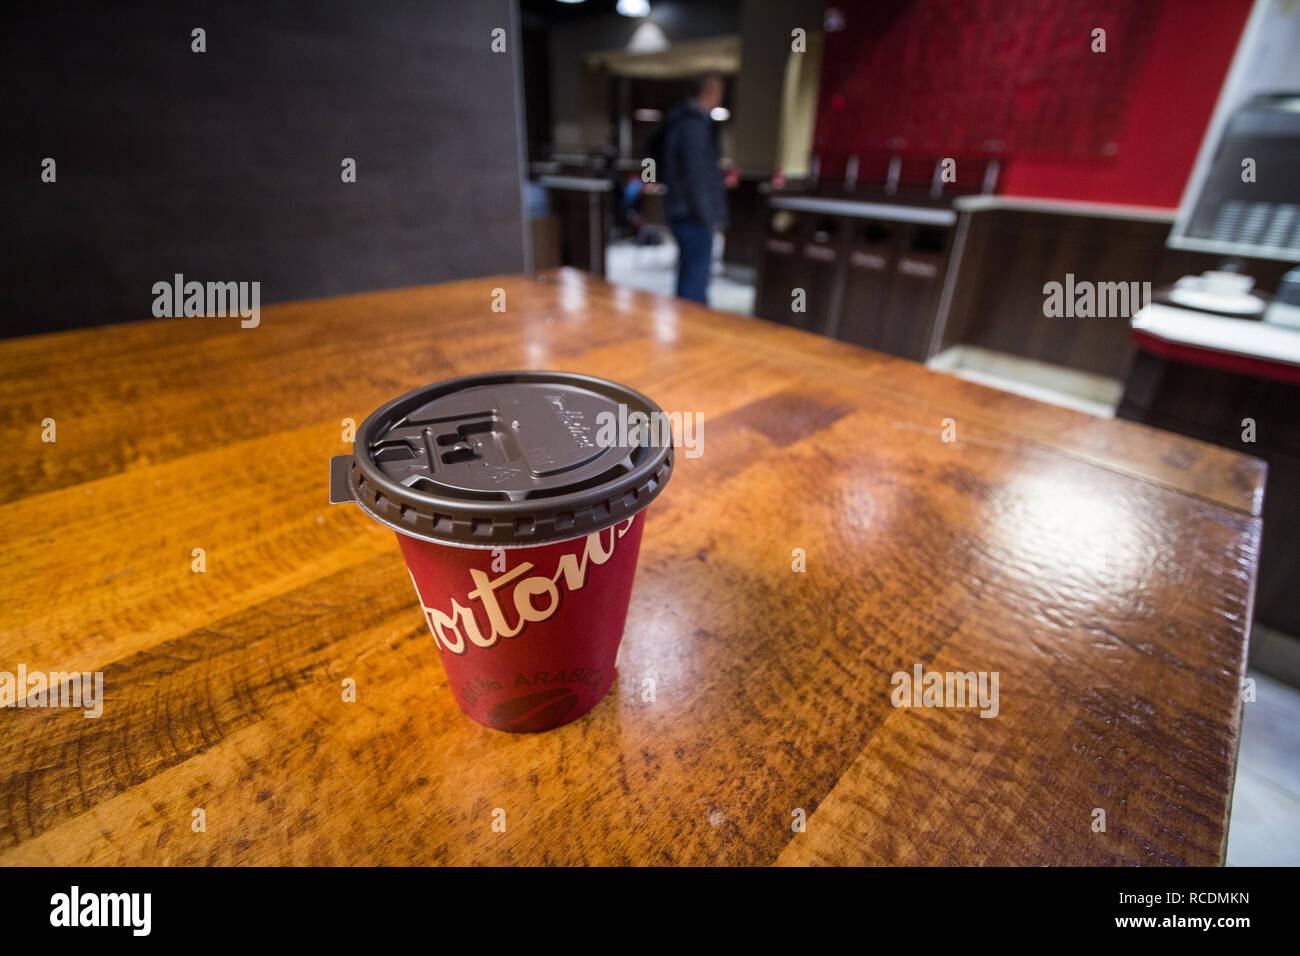 MONTREAL, CANADA - NOVEMBER 9, 2018: Close up on a cardboard coffee cup with Tim Hortons logo in one of their restaurants in Montreal, Quebec. Tim Hor Stock Photo